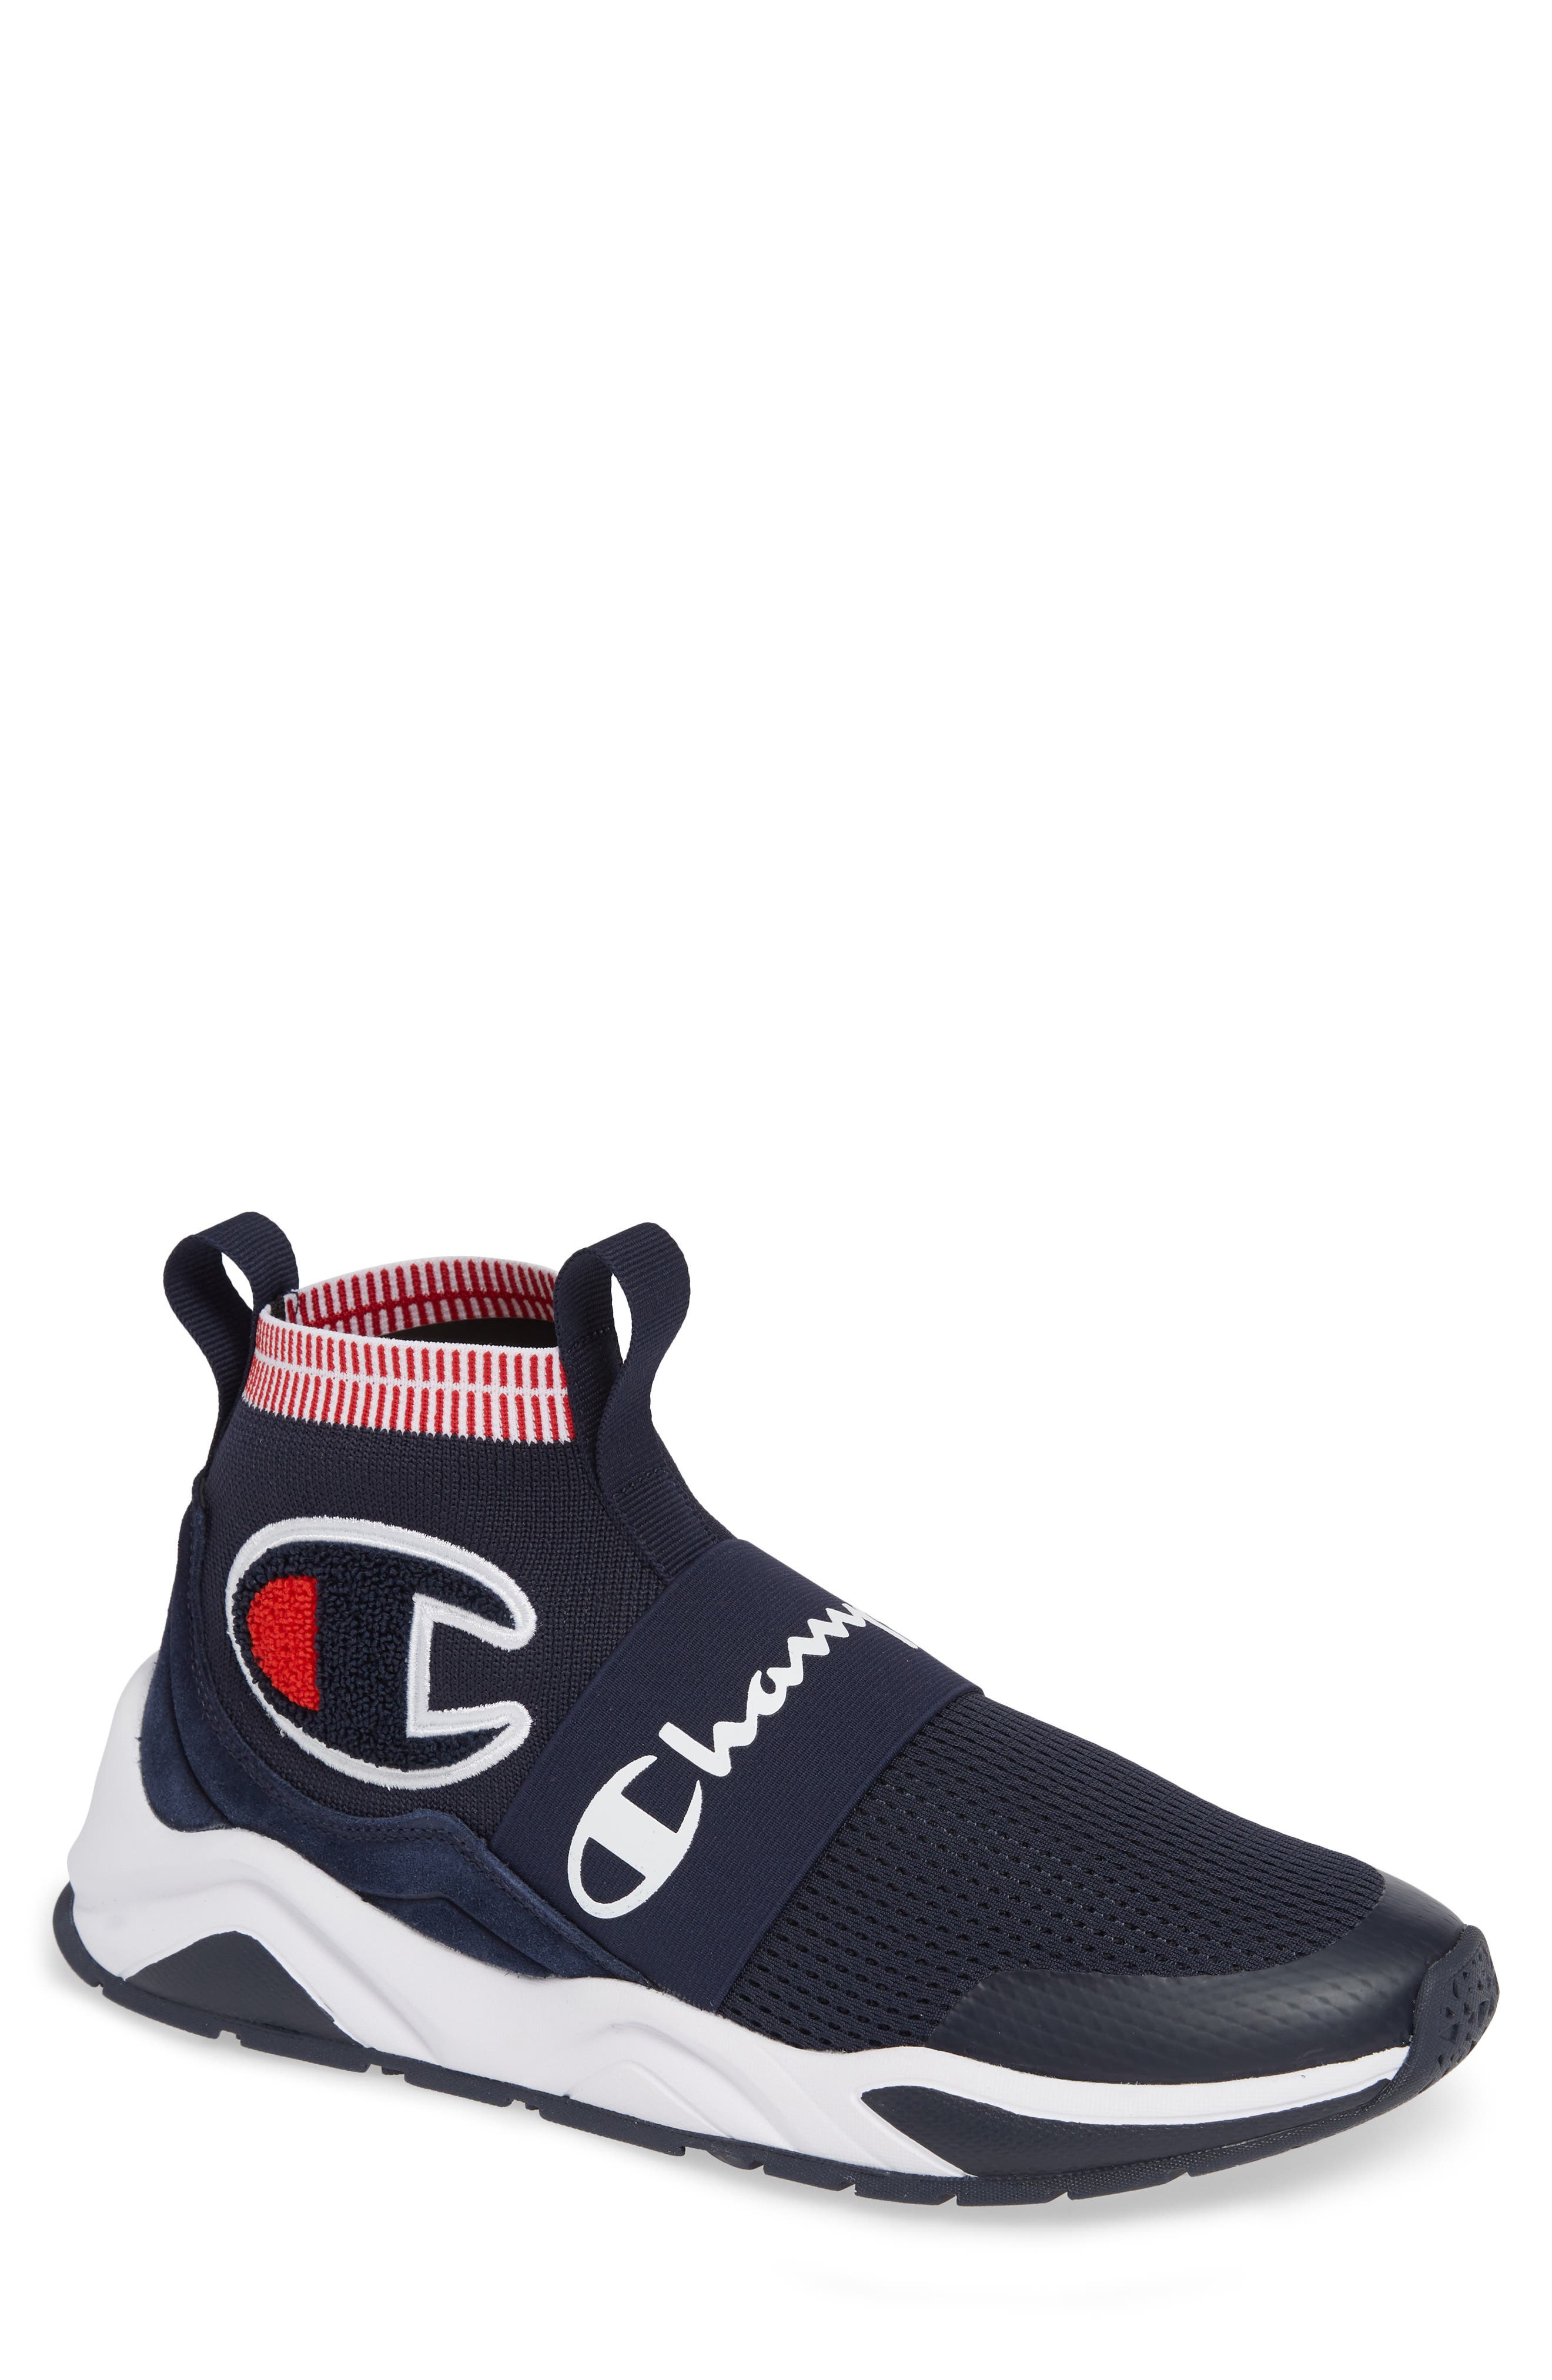 champion shoes nordstrom